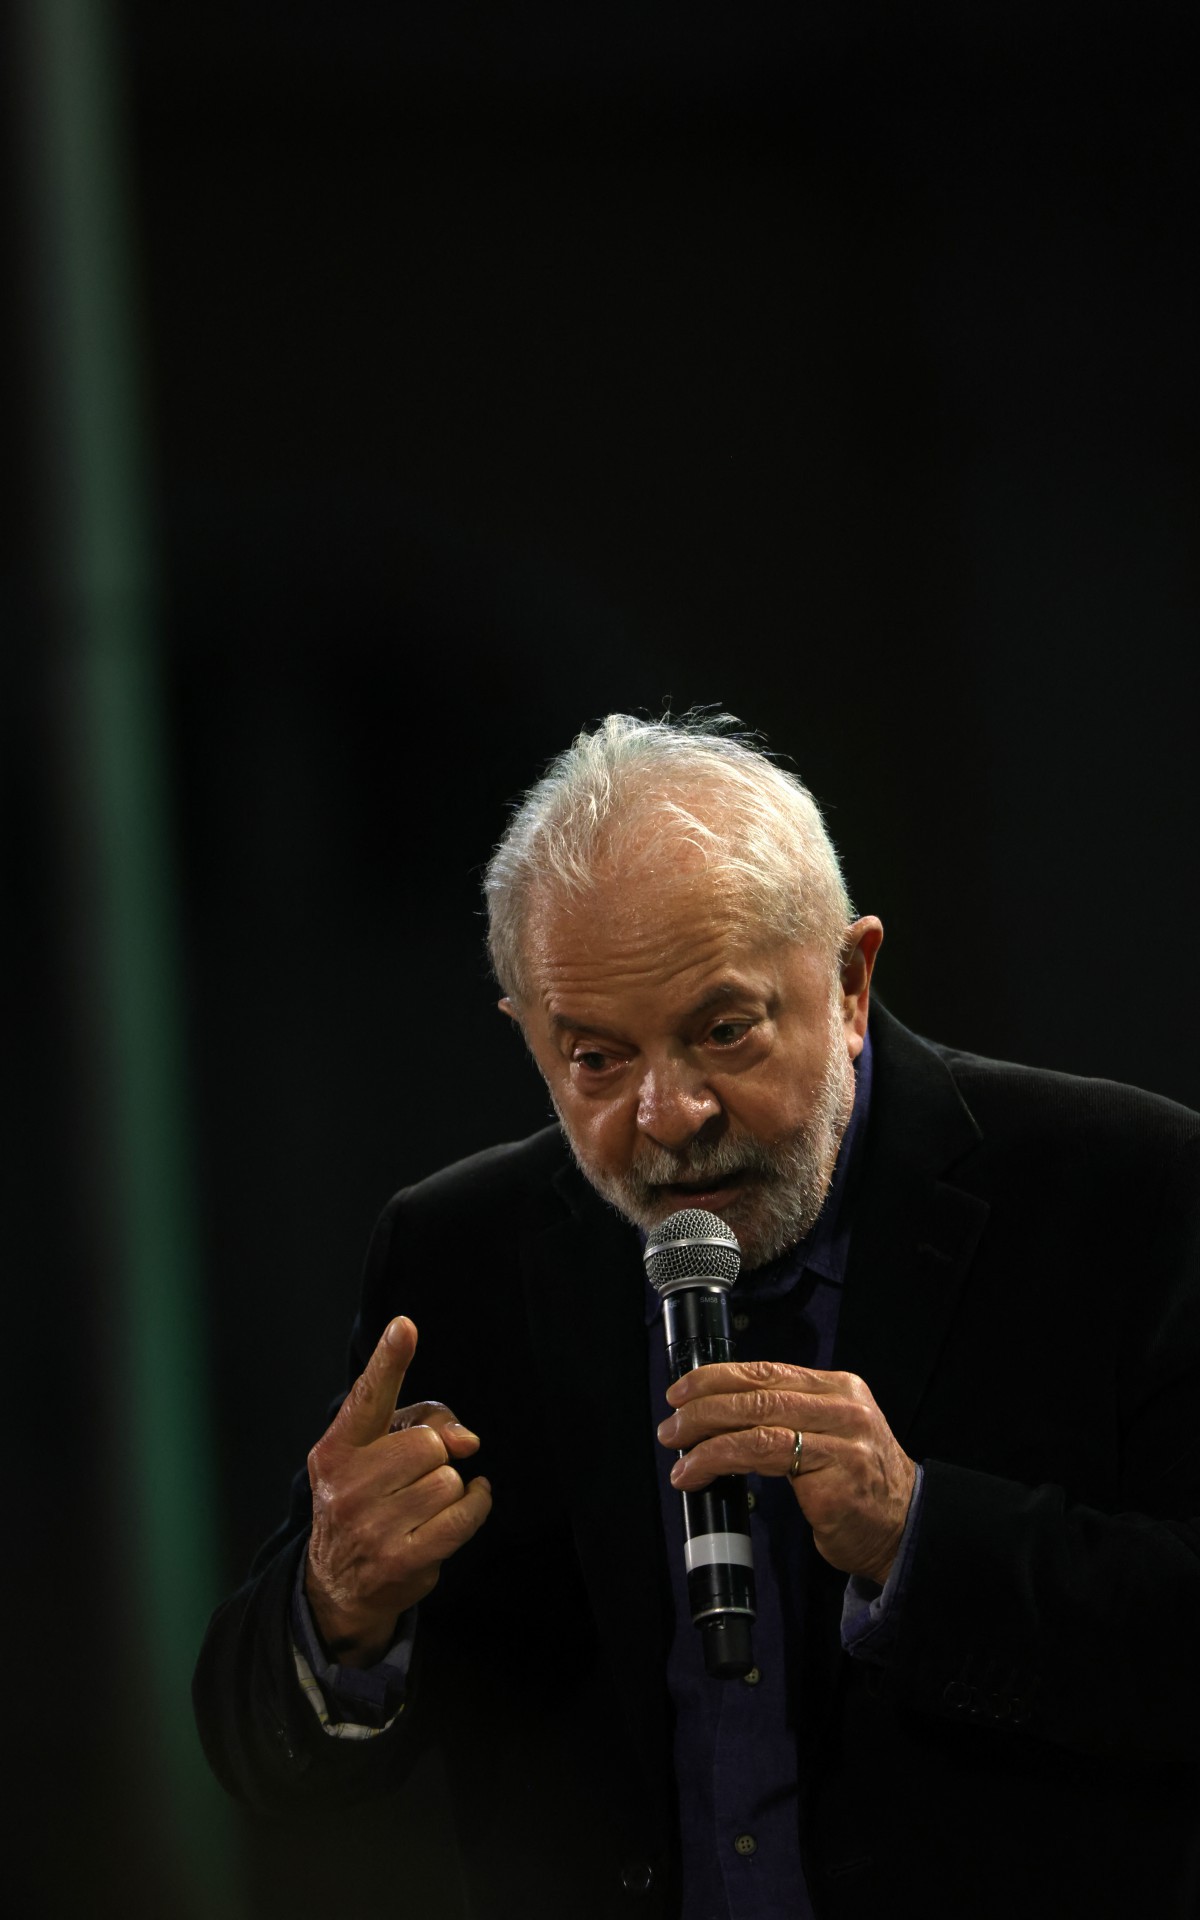 Brazil's presidential candidate for the leftist Workers Party (PT) and former President (2003-2010) Luiz Inacio Lula da Silva speaks during a campaign rally in Porto Alegre, Brazil, on September 16, 2022. Brazil holds its presidential elections on October 2.
SILVIO AVILA / AFP - SILVIO AVILA / AFP